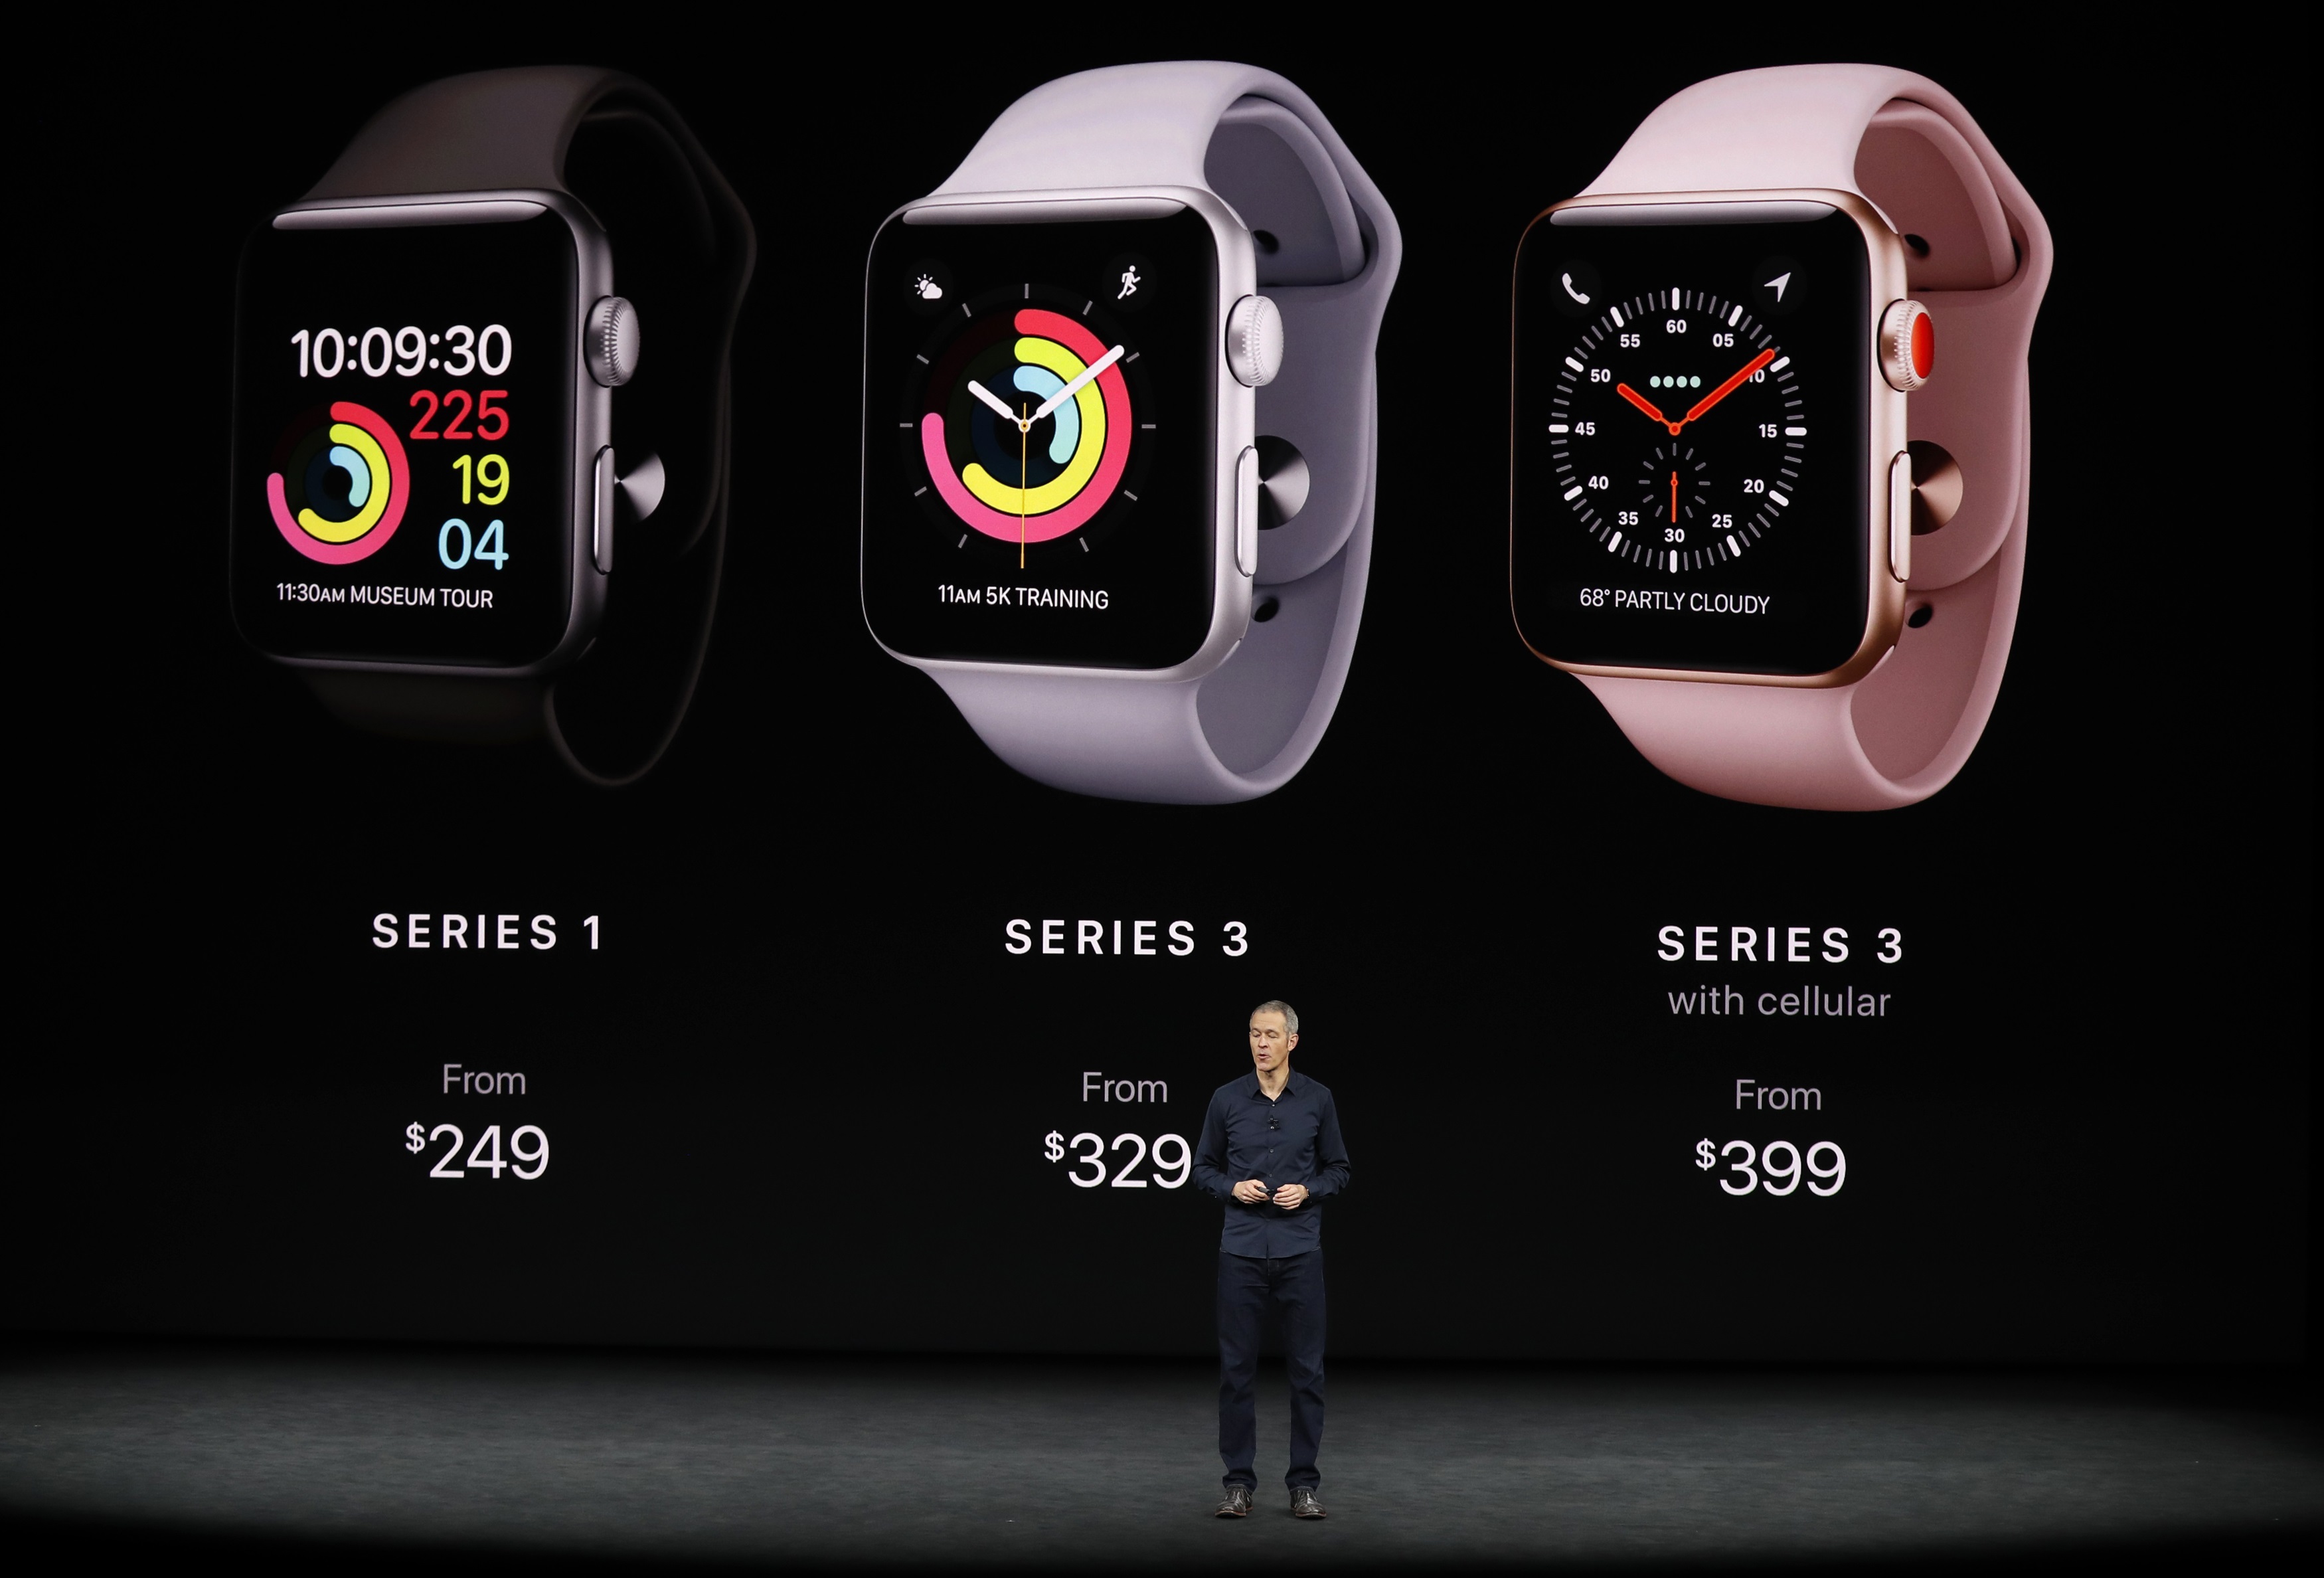 Apple unveils cellular watch as new iPhone awaited